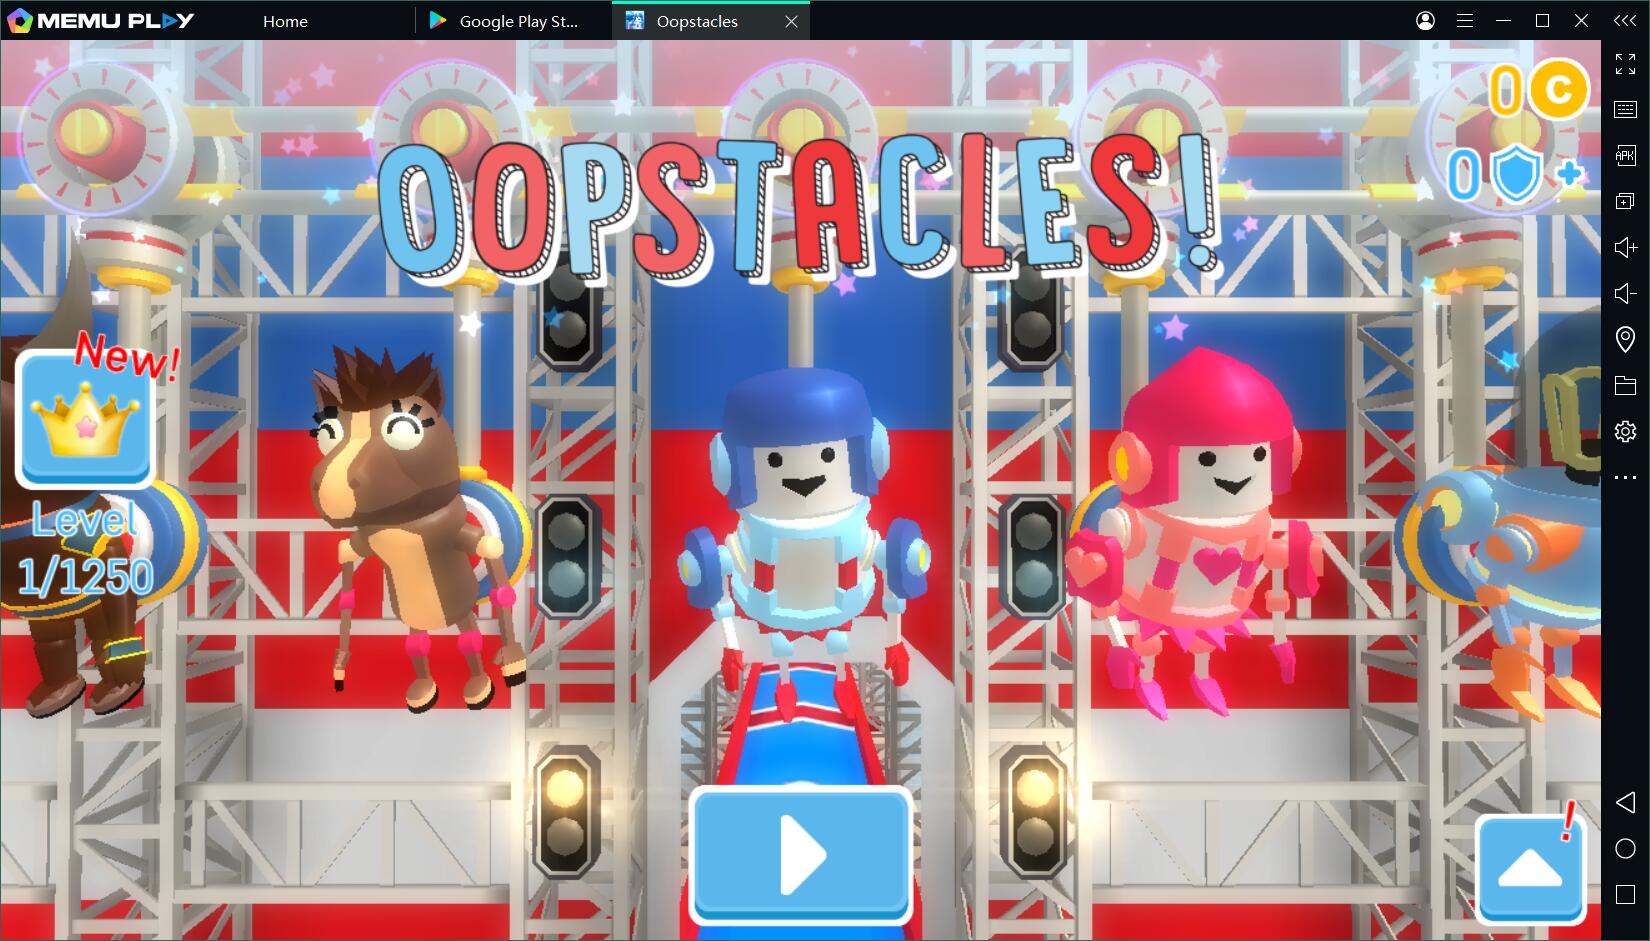 Download Stumble Guys: Multiplayer Royale on PC with MEmu